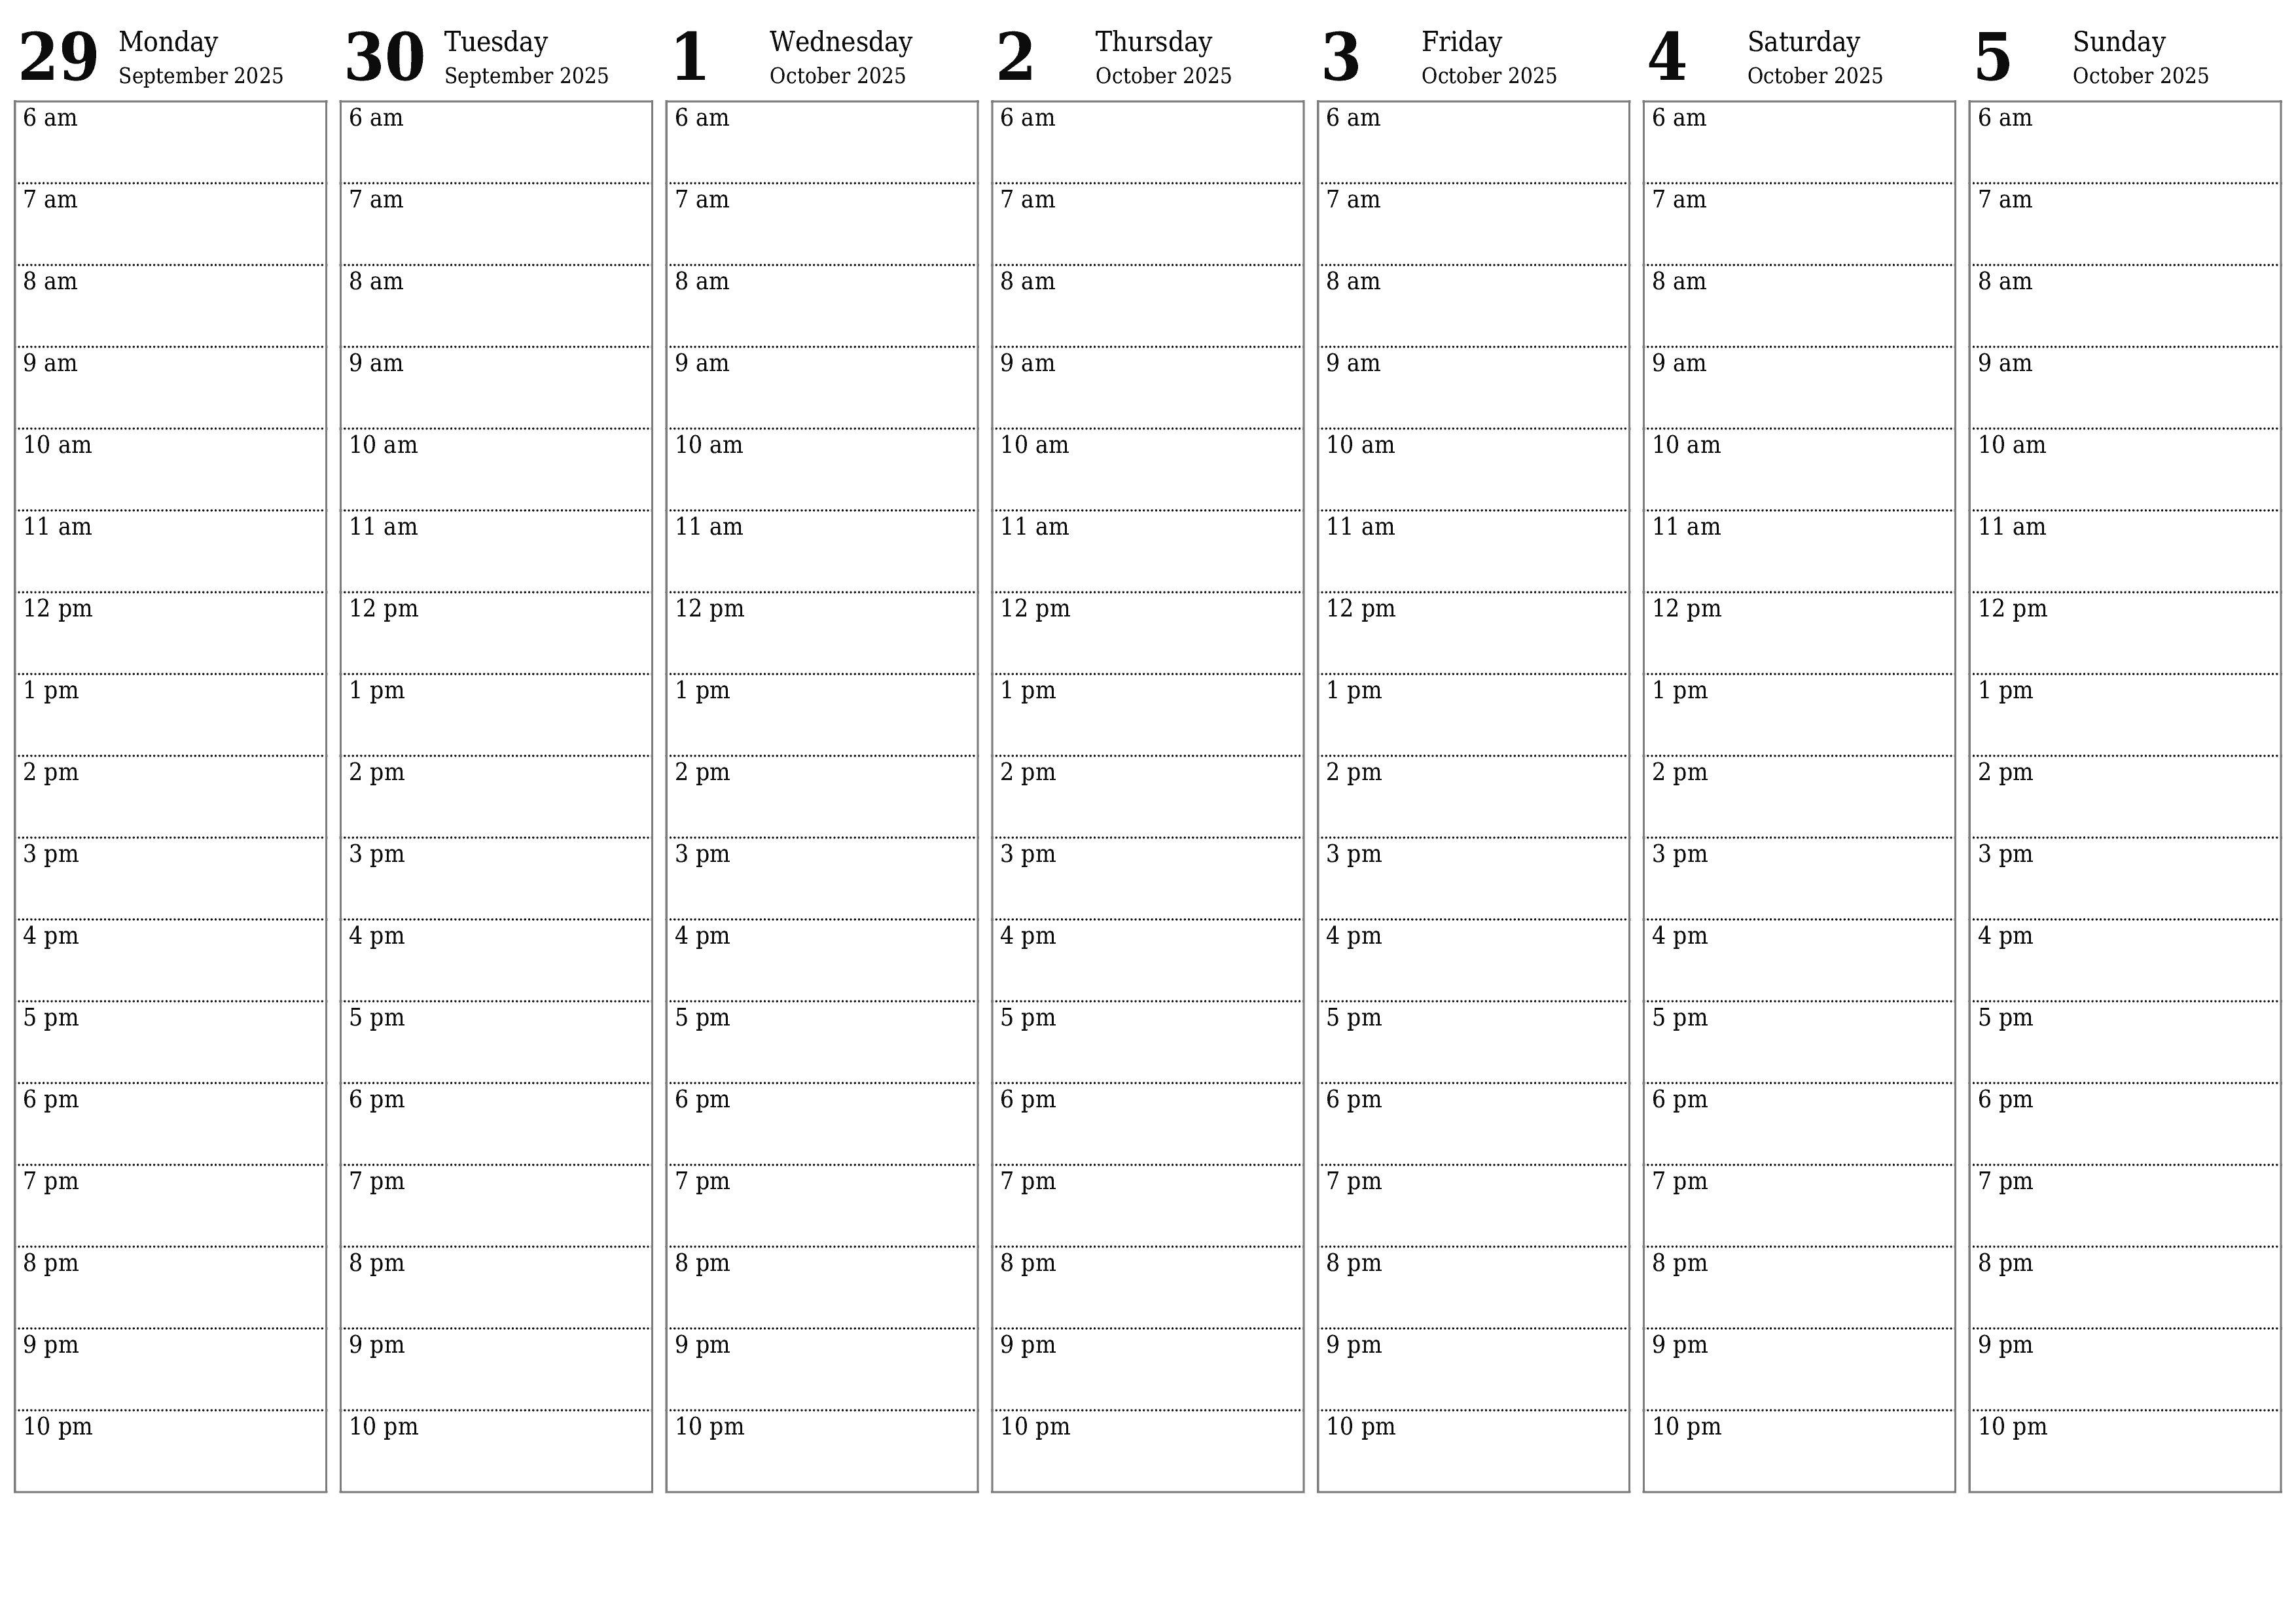 Blank weekly printable calendar and planner for week October 2025 with notes, save and print to PDF PNG English